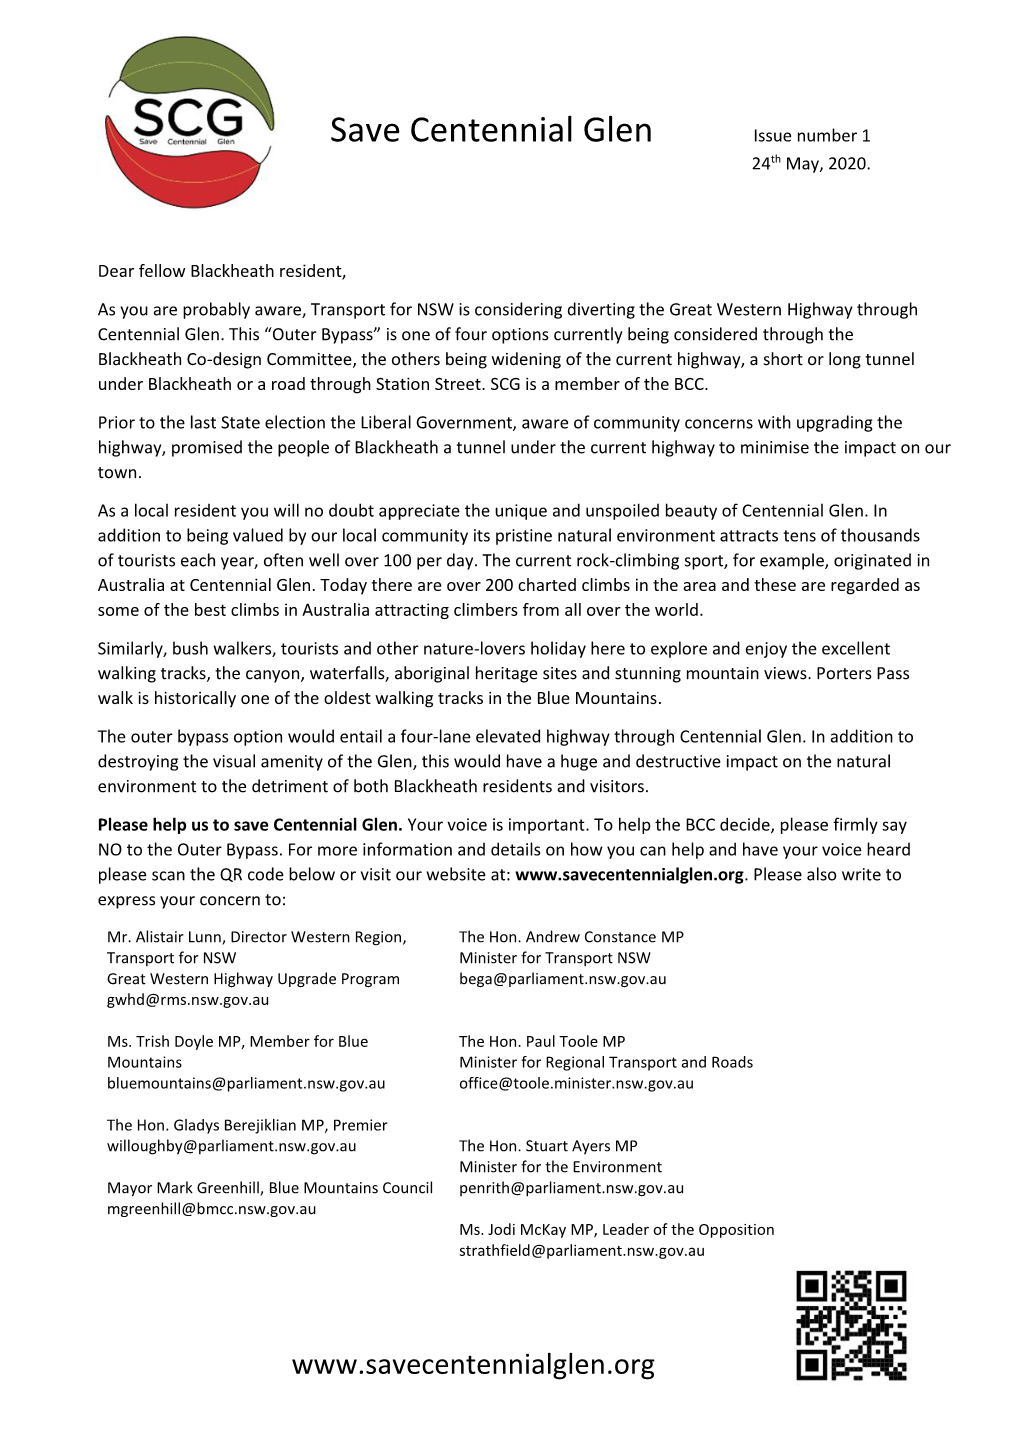 Letter to Blackheath Residents, Issue 1, 24 May